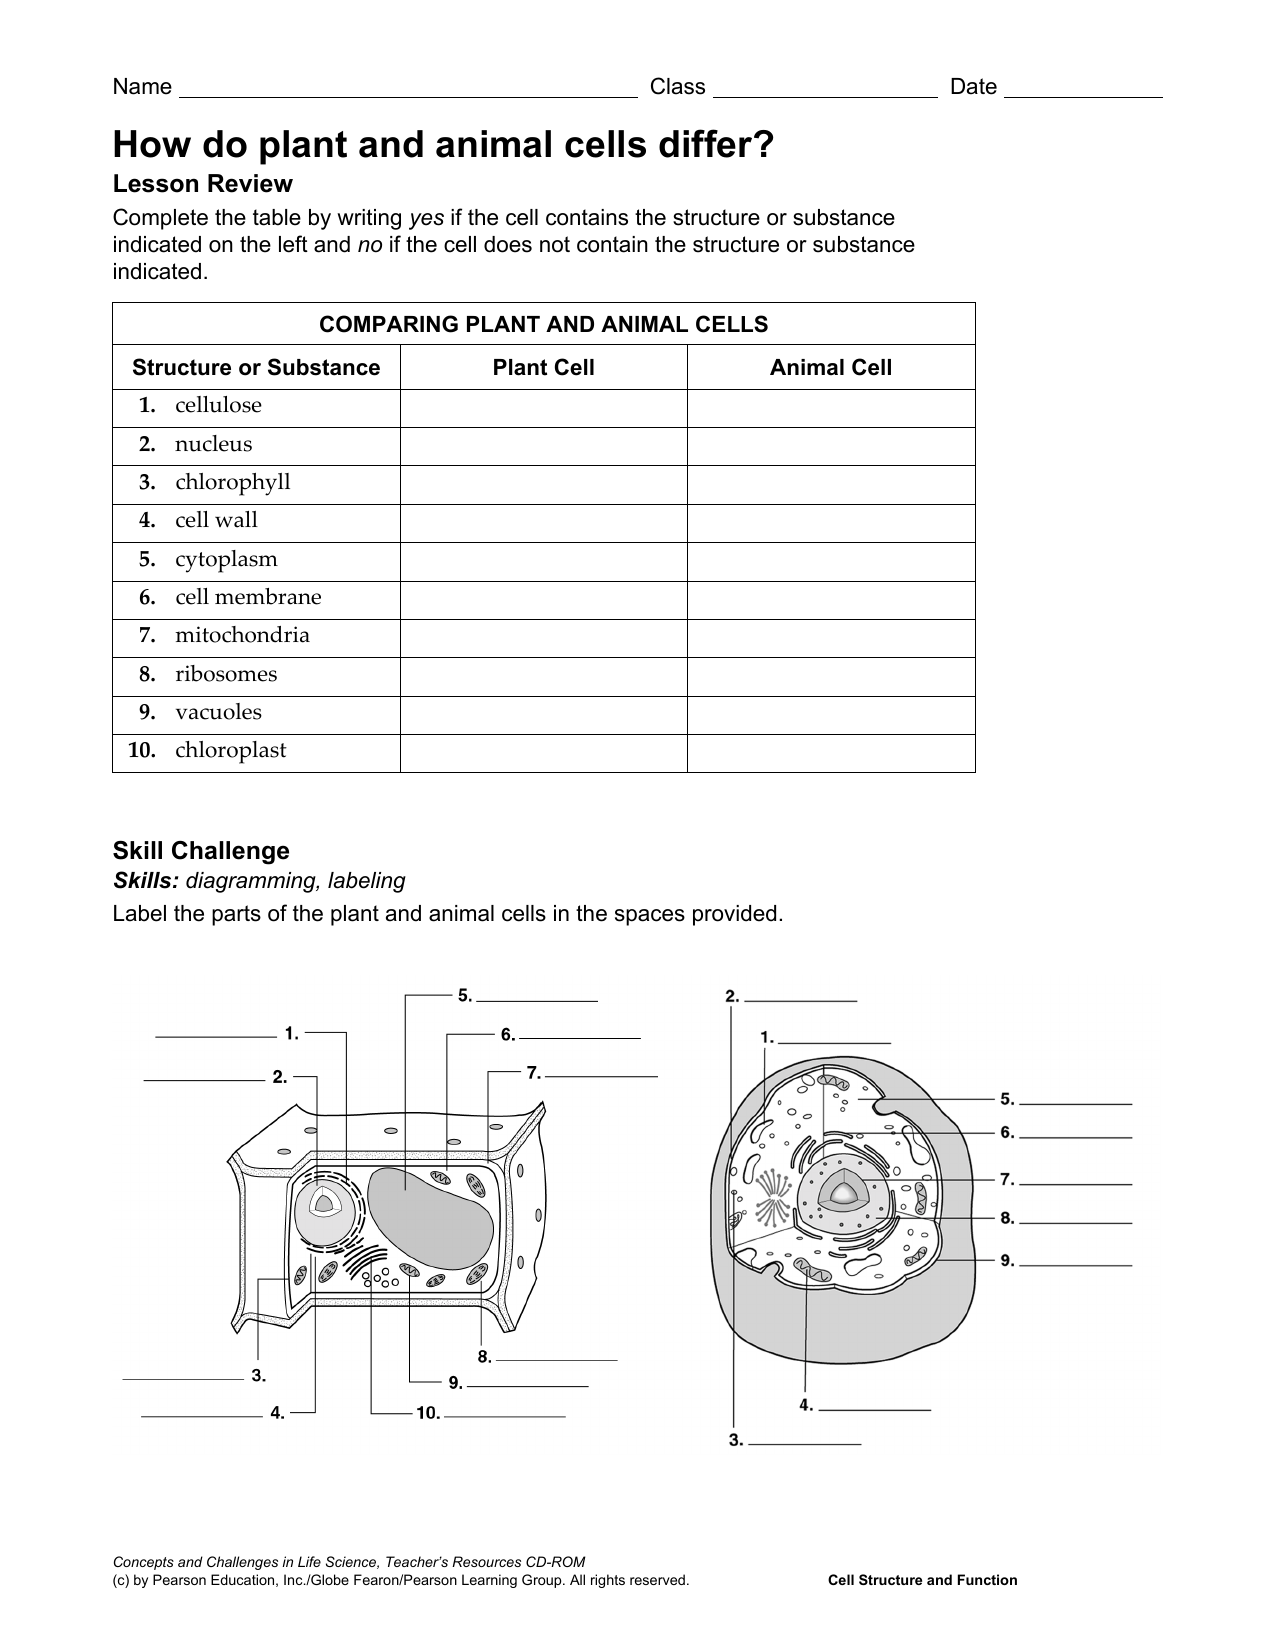 Animal And Plant Cells Worksheet